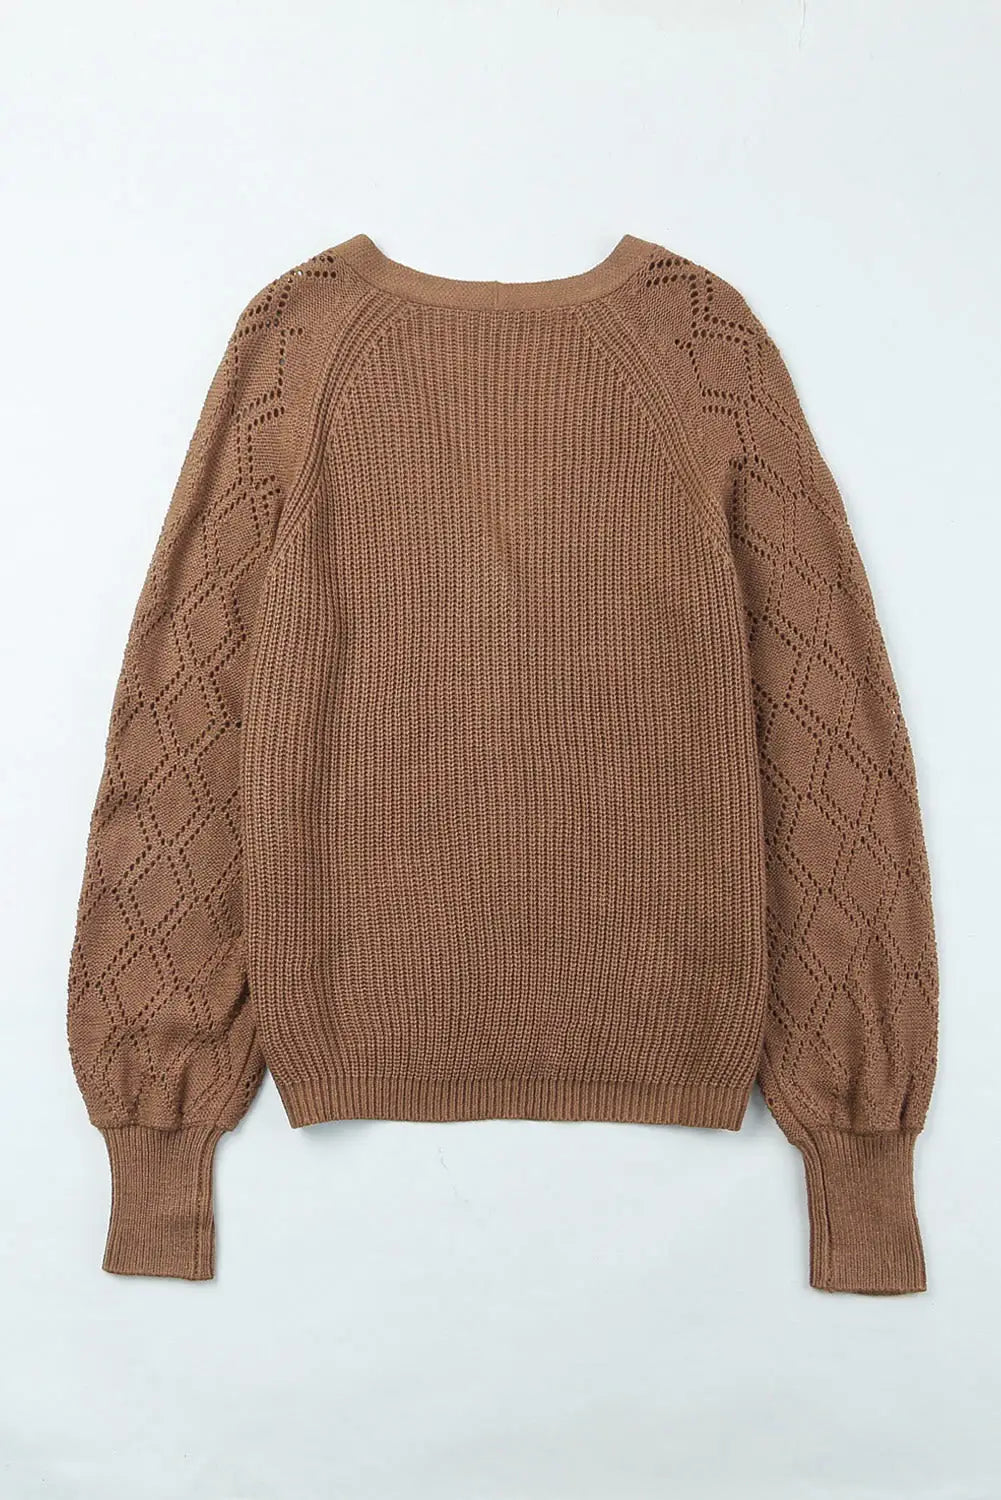 Bishop sleeve button v neck sweater - sweaters & cardigans